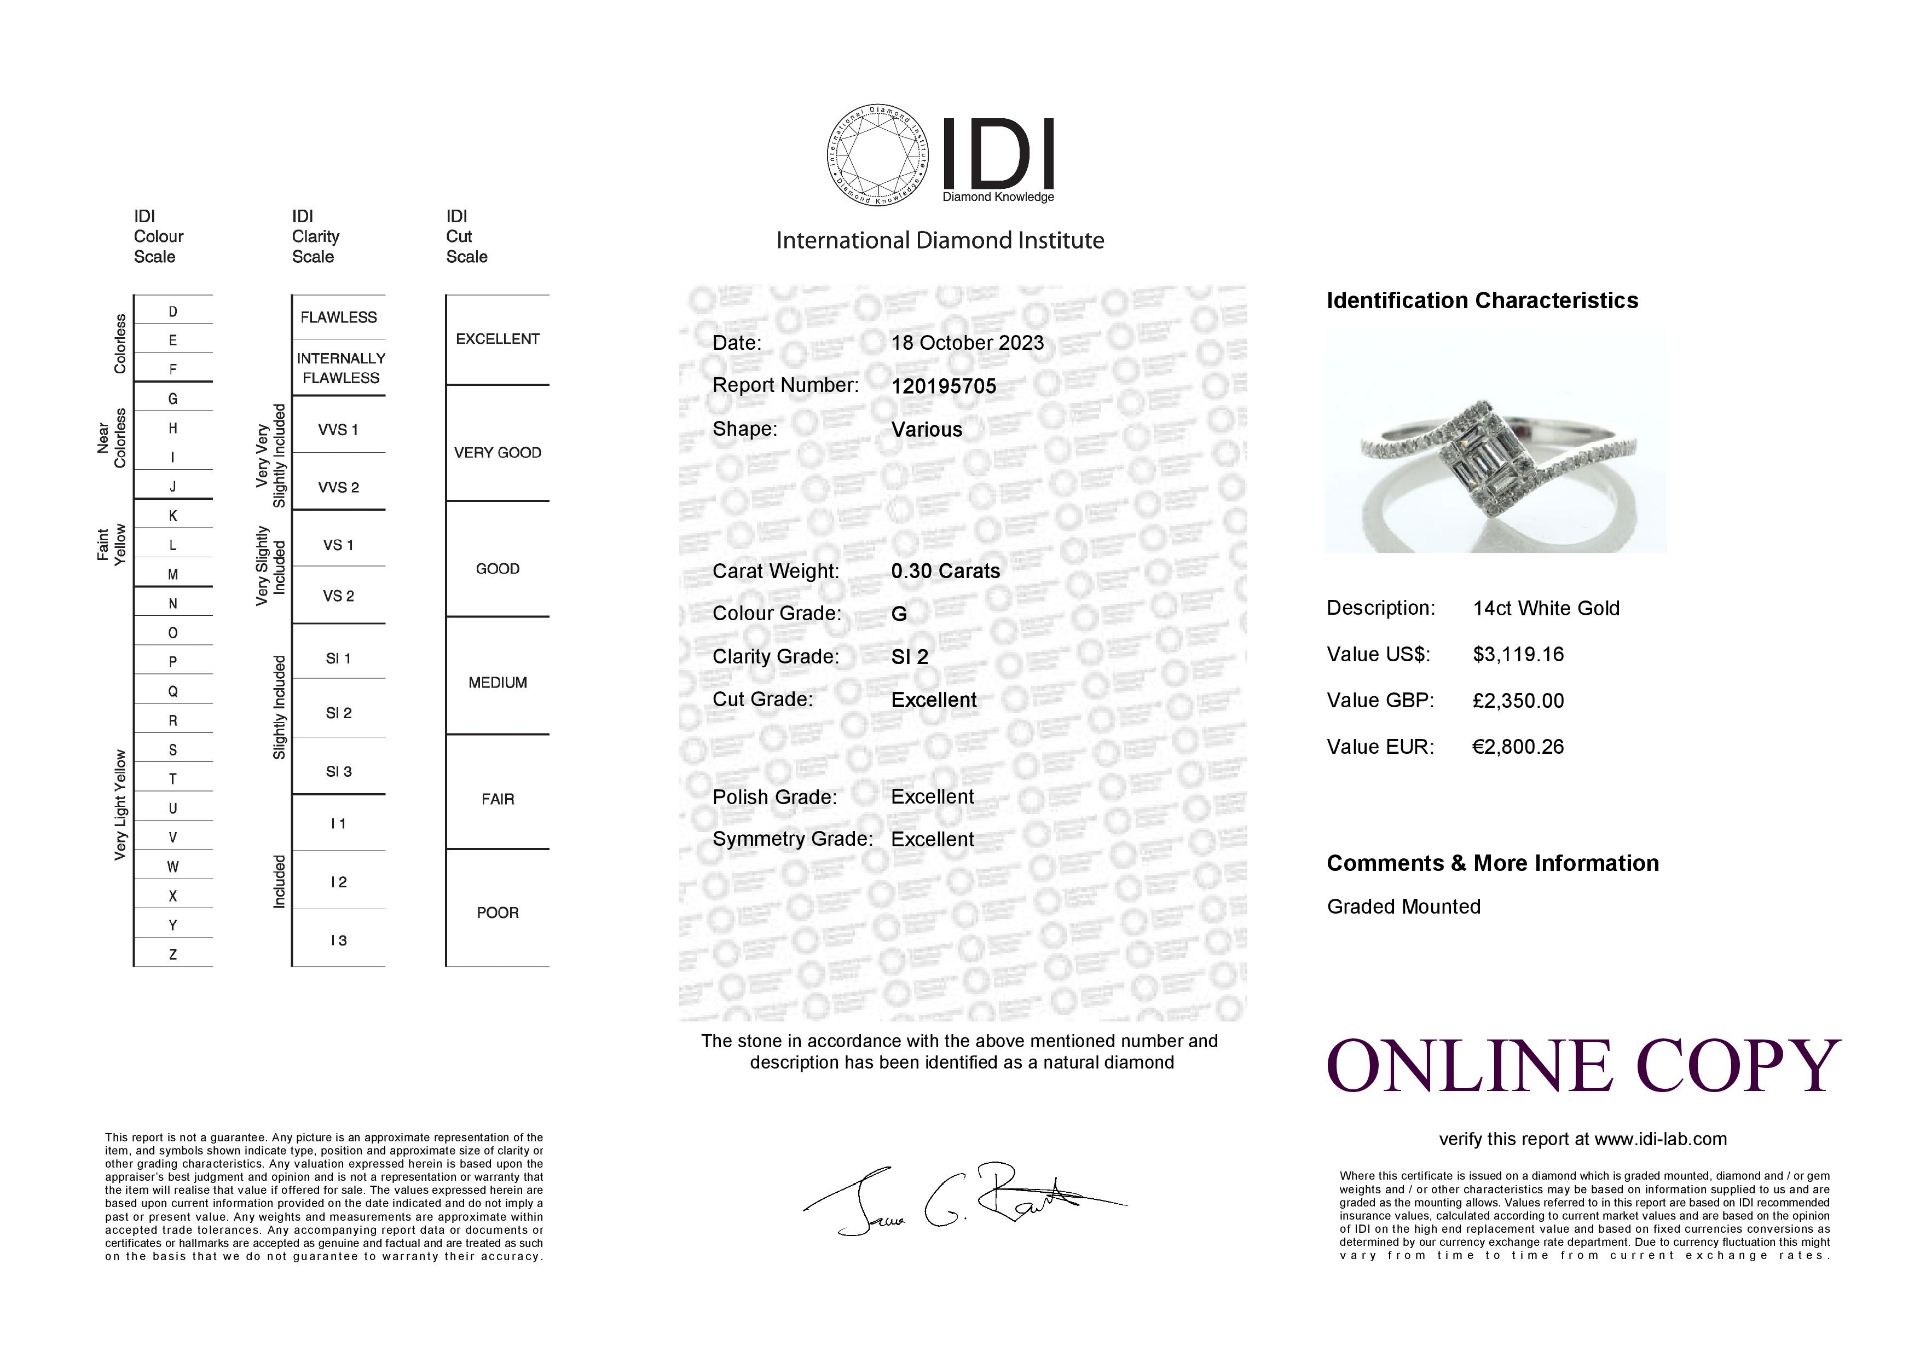 14ct White Gold Twist Top Cluster Diamond Ring 0.30 Carats - Valued By IDI £2,350.00 - A lovely - Image 7 of 7